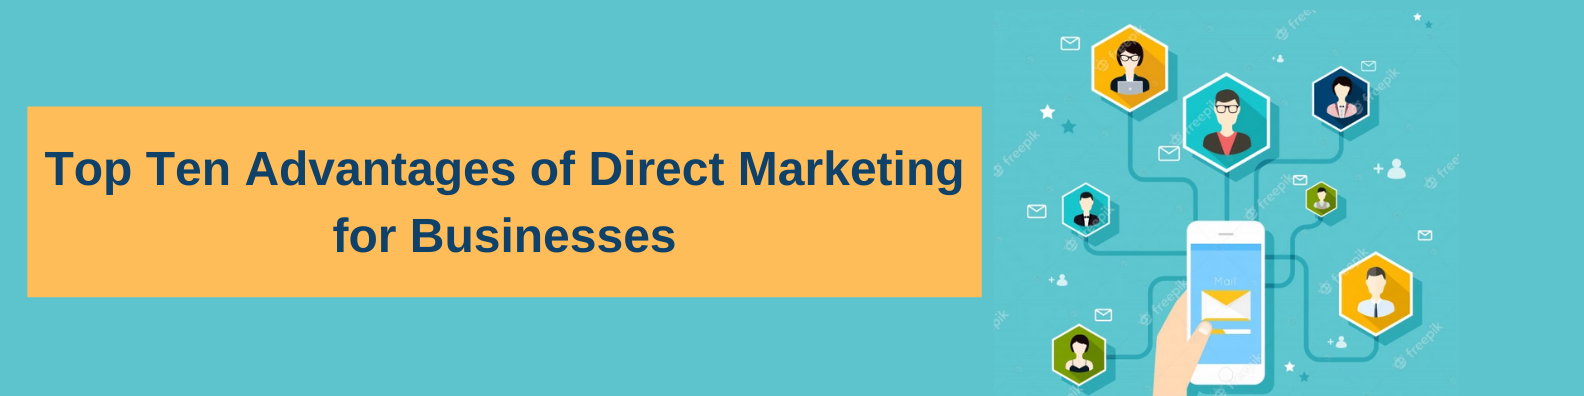 Top Ten Advantages of Direct Marketing for Businesses